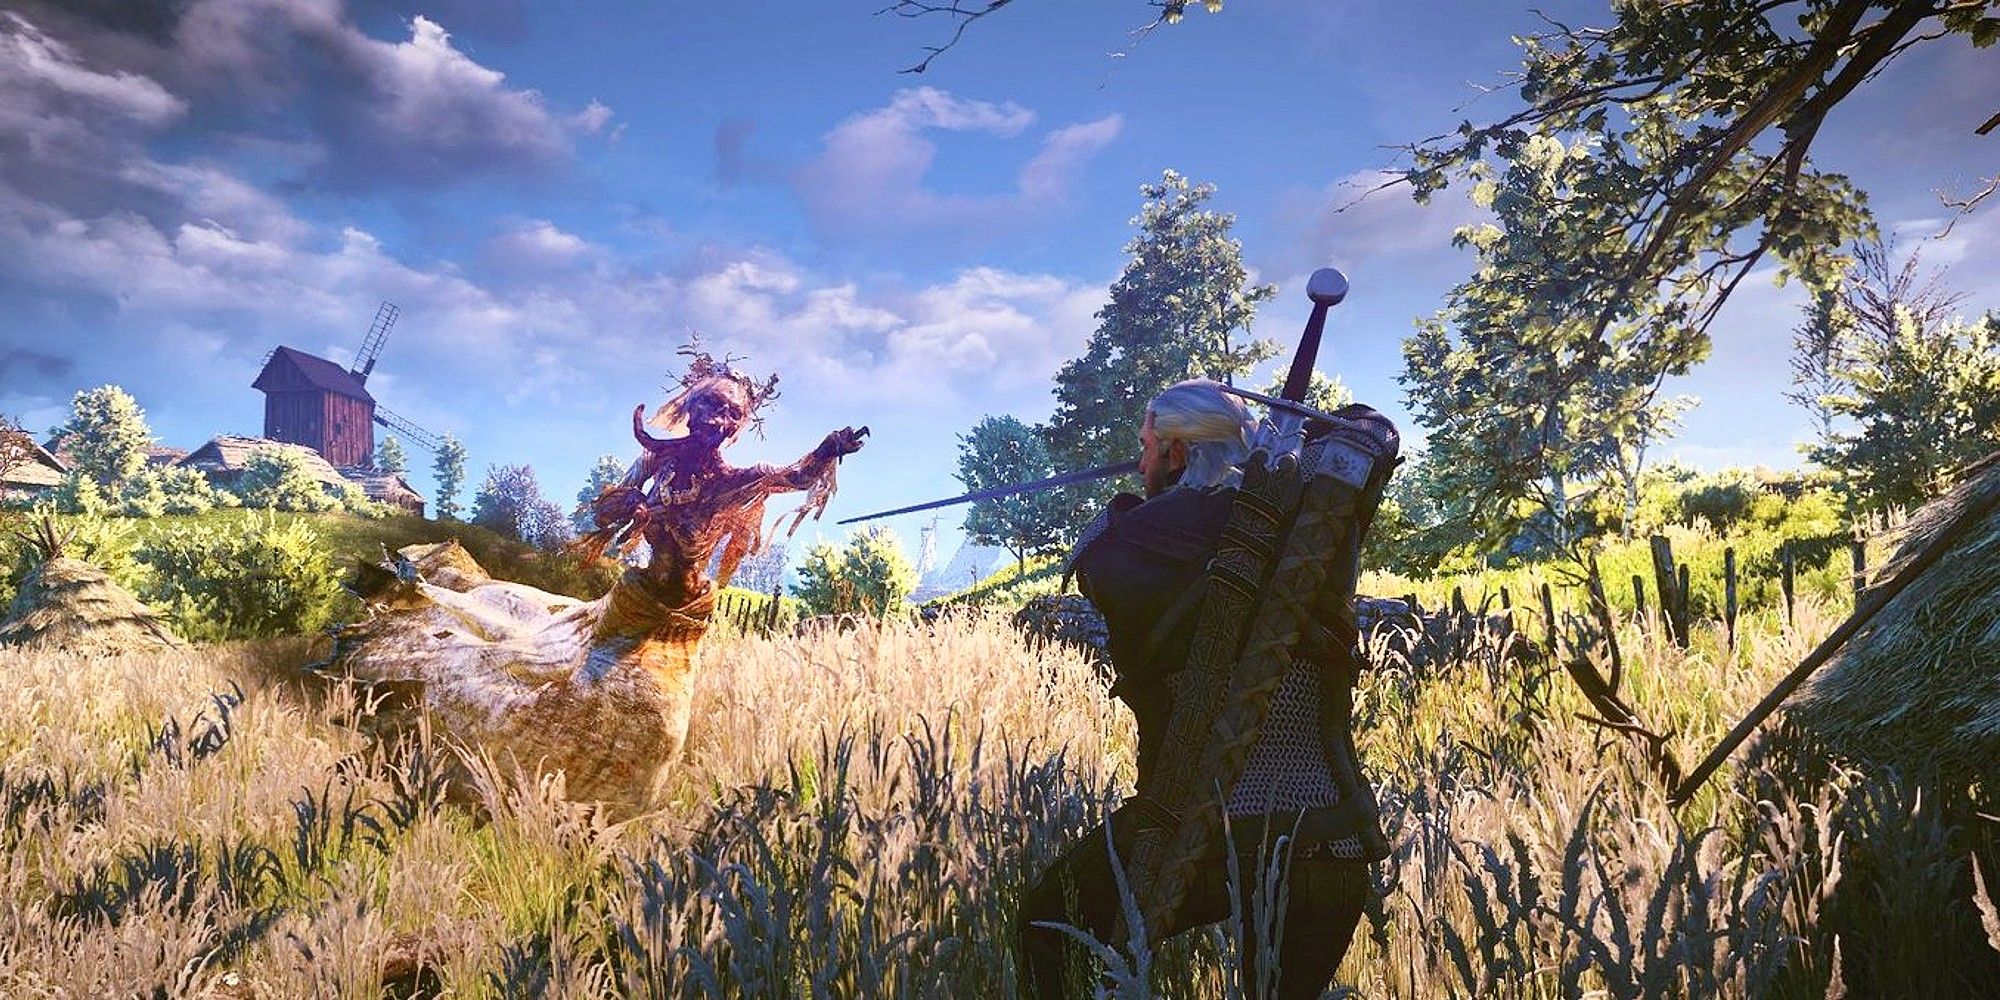 A noonwraith lunging towards Geralt who is prepared to attack